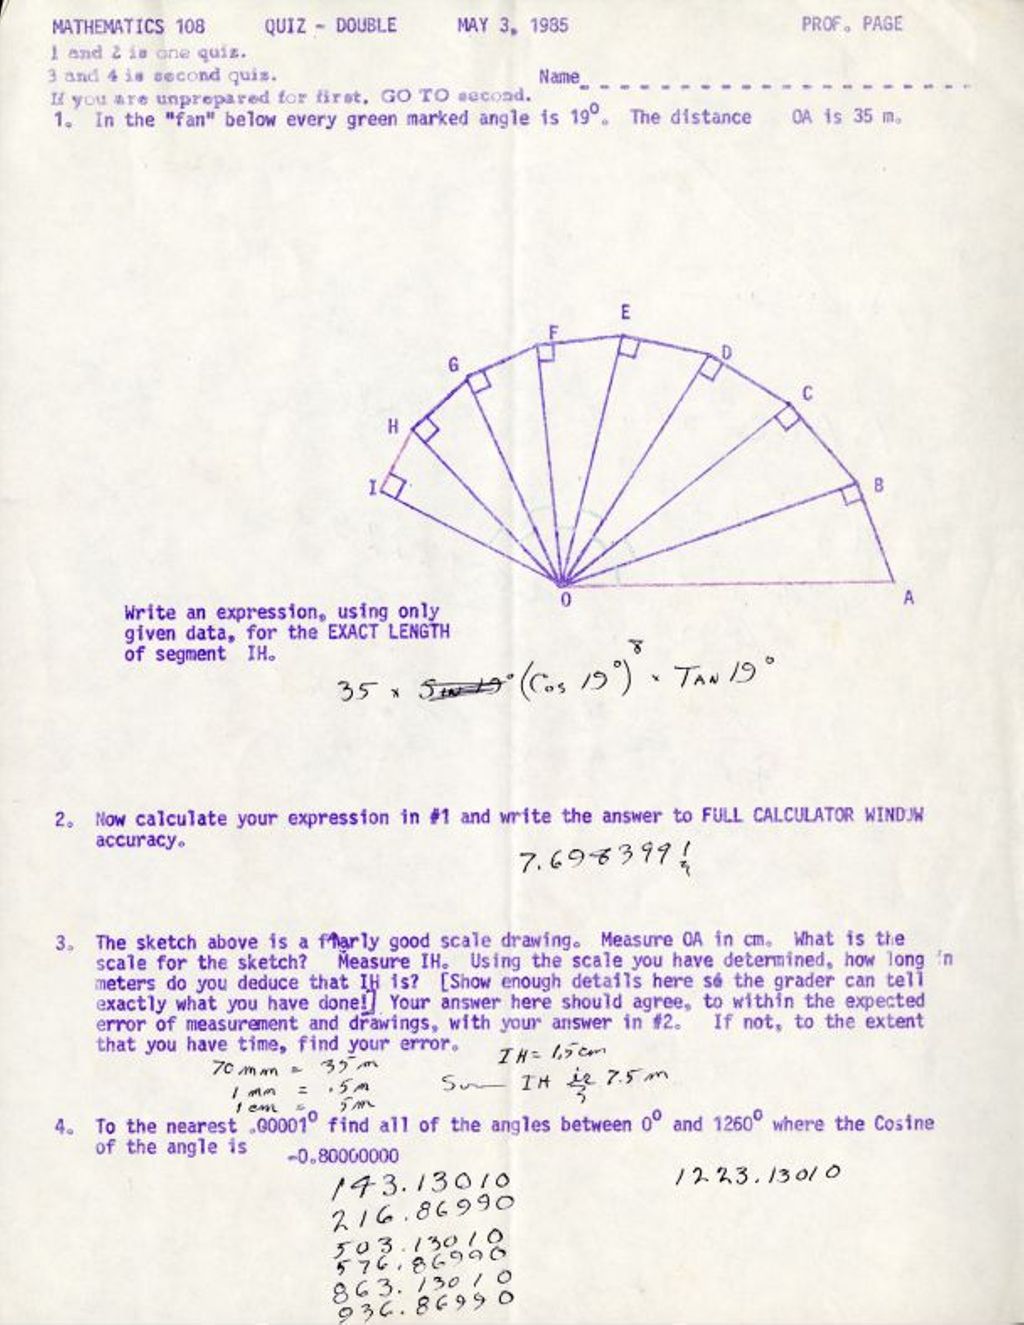 Math 108 Quiz Double (1985) In the “fan” below ever green marked angles is 19 degrees. The distance of OA is 35 m w/ DP notes